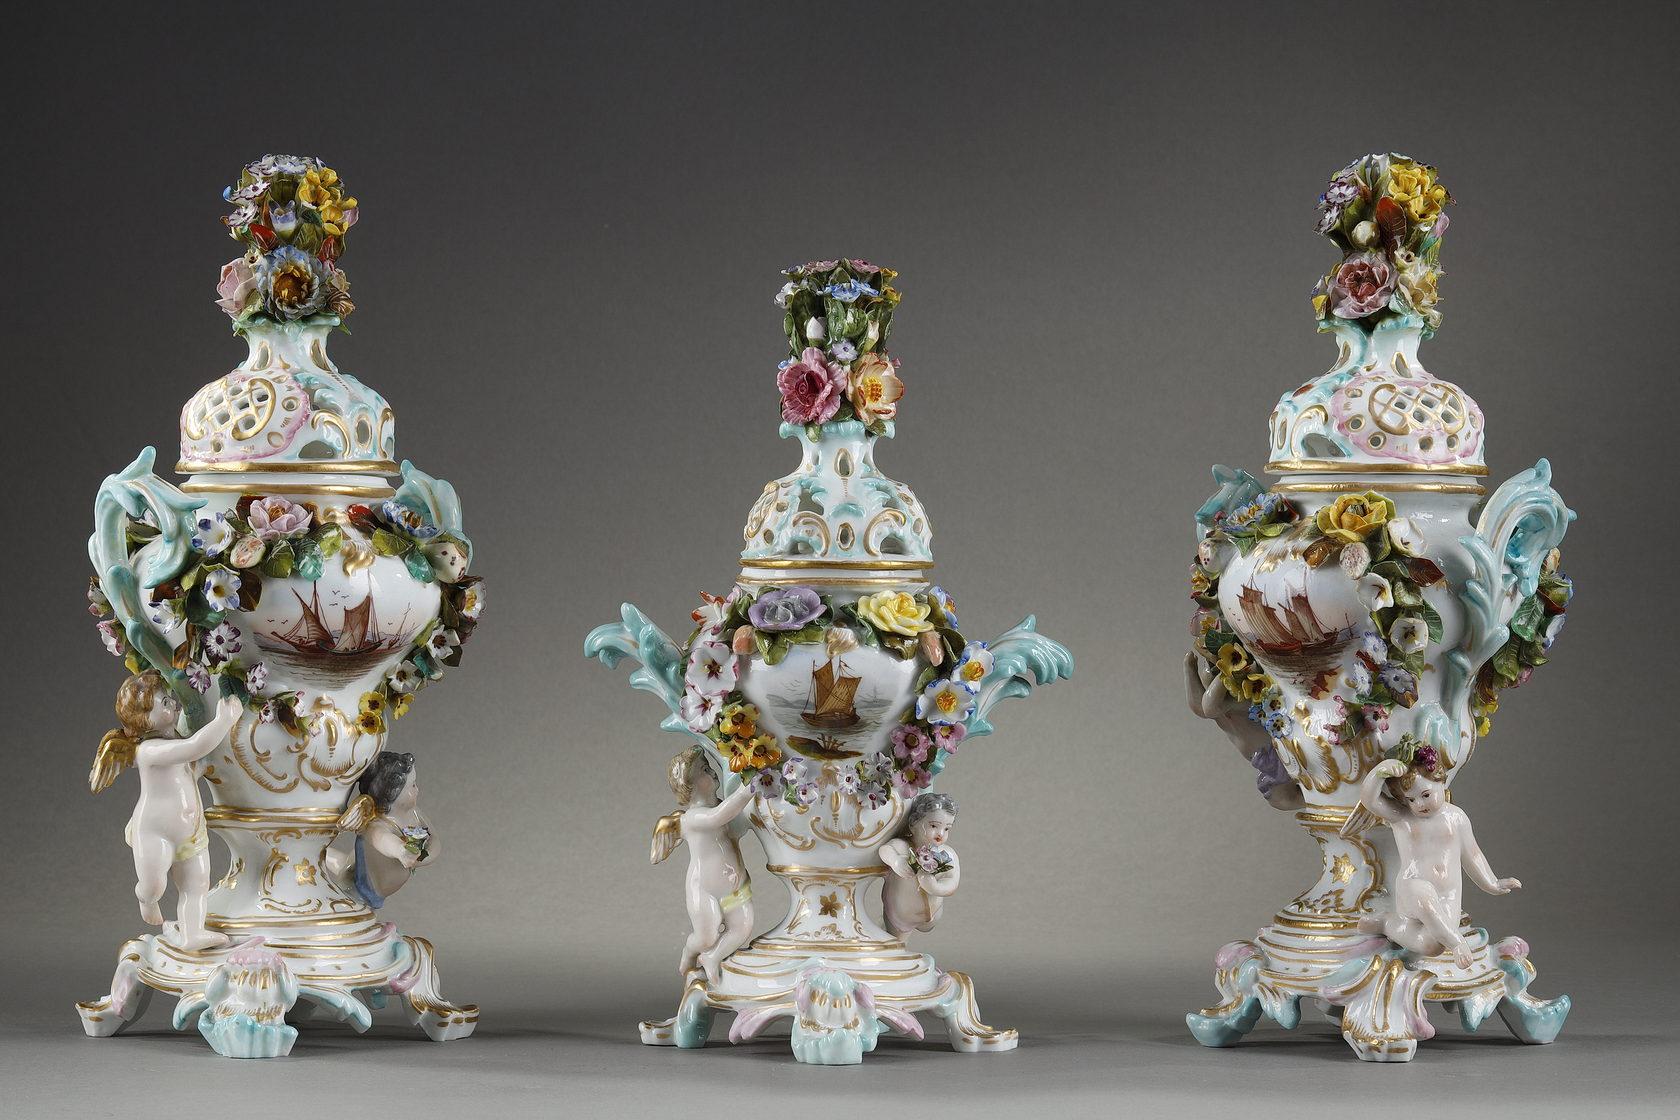 Perfume burner in polychrome porcelain from the Meissen manufacture 12